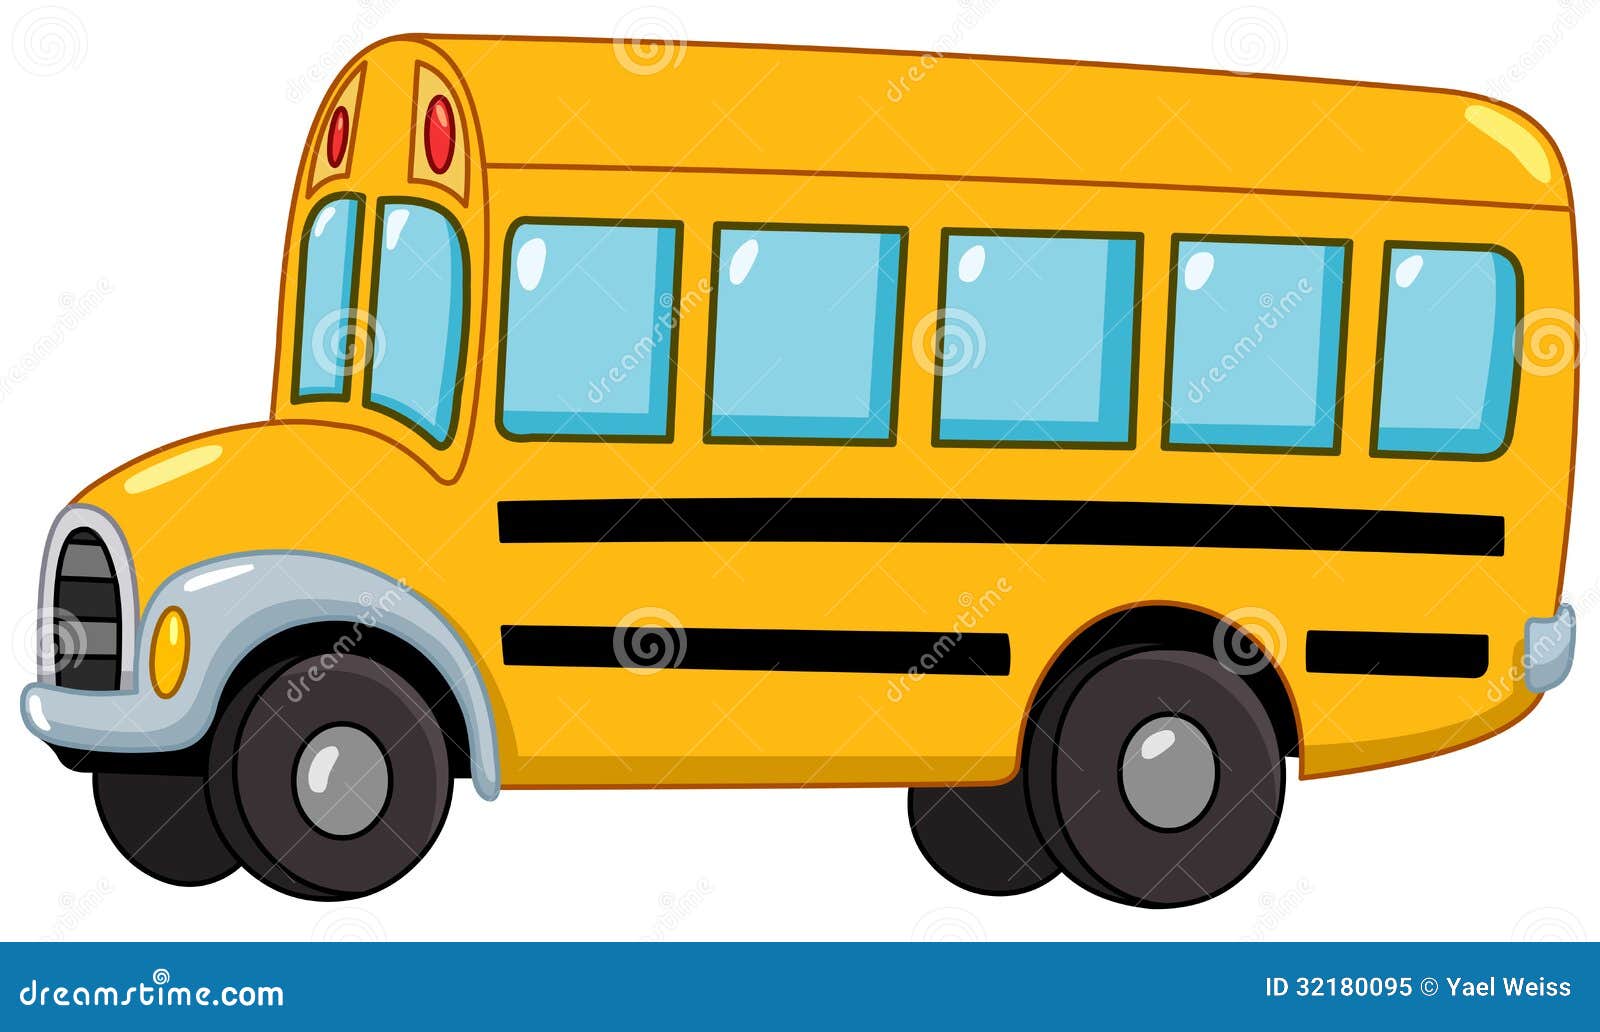 funny bus clipart - photo #36